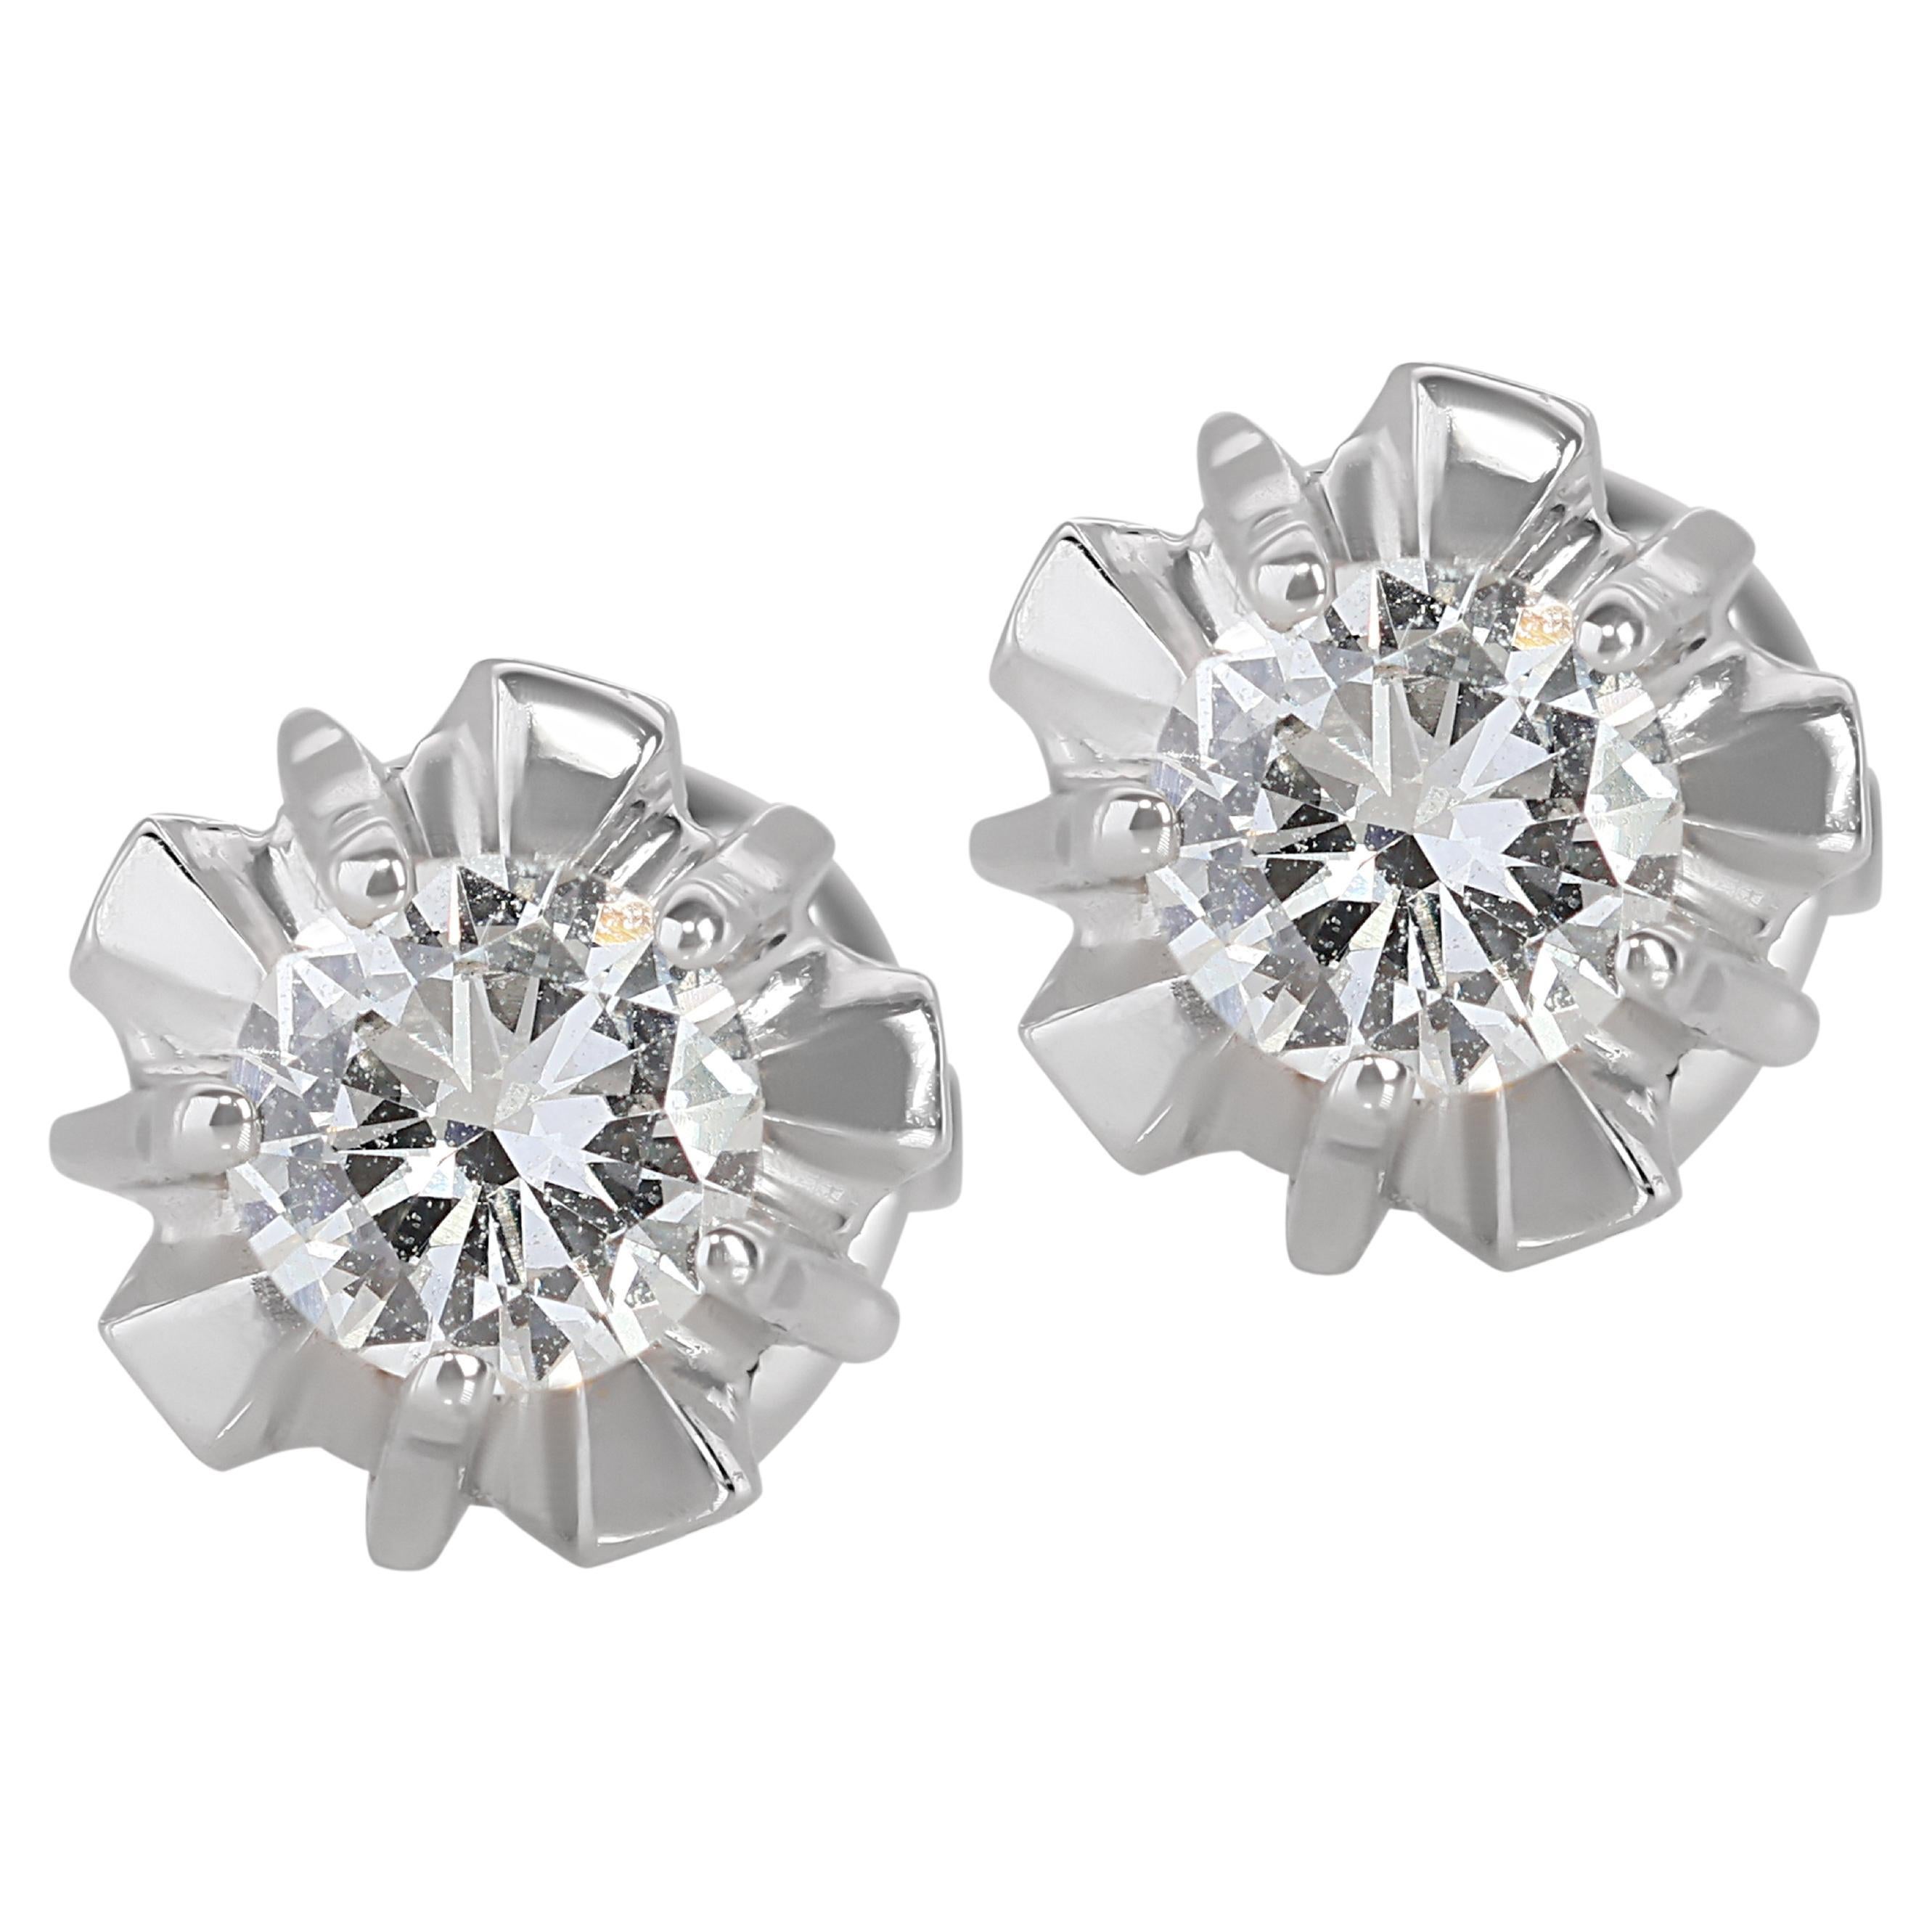 Classic 14k White Gold Solitaire Stud Earrings with 0.40 Ct Natural Diamonds